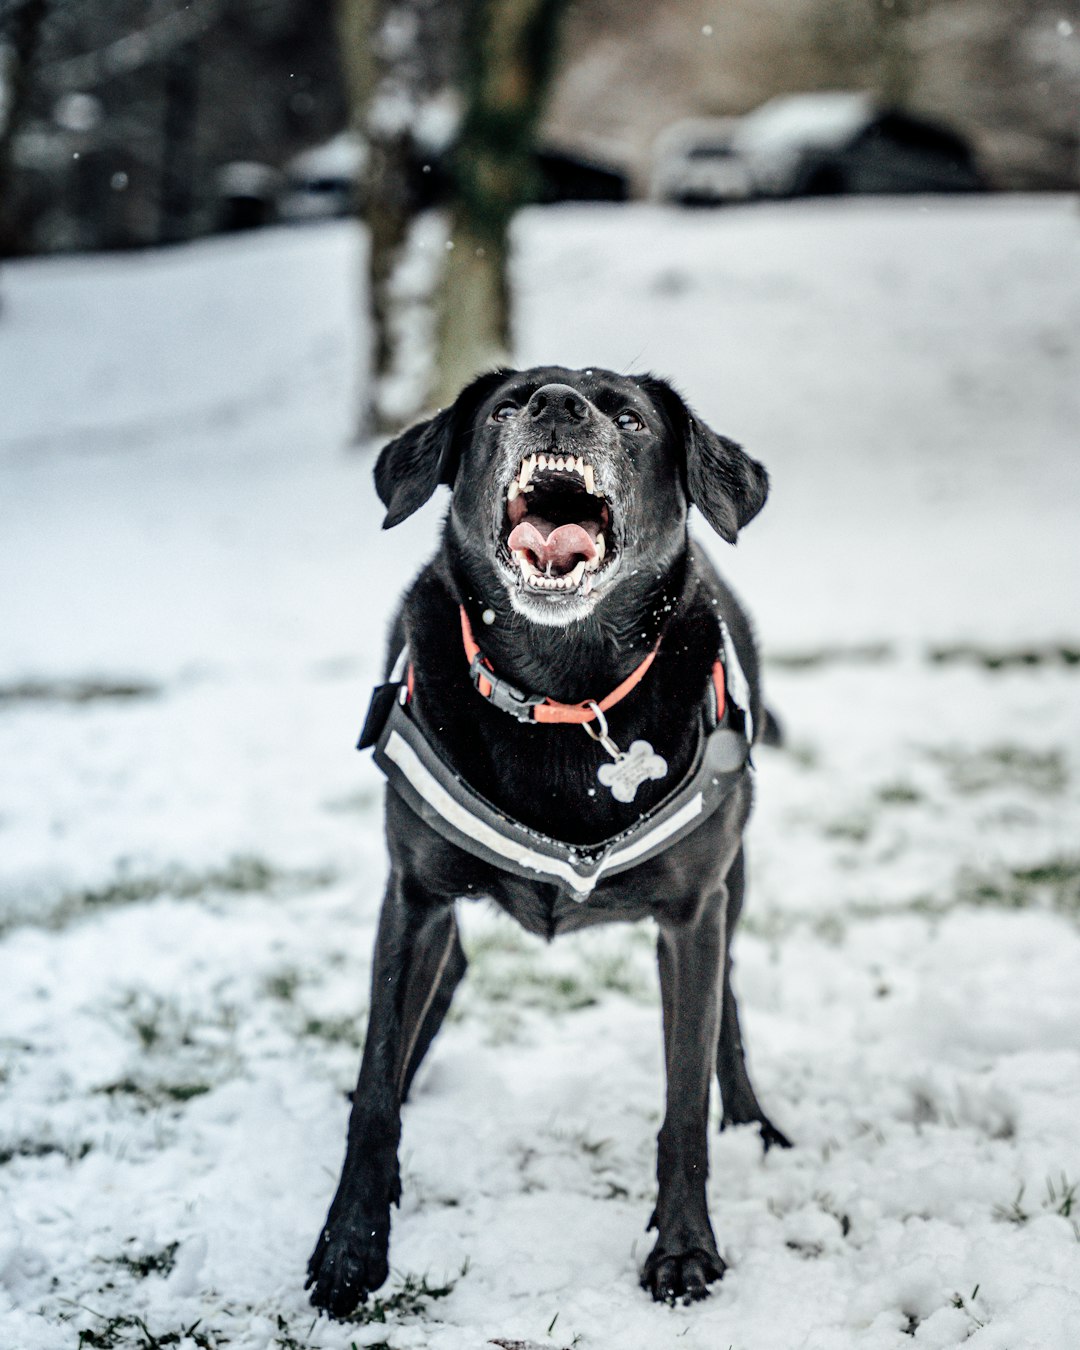 black and white short coated dog on snow covered ground during daytime